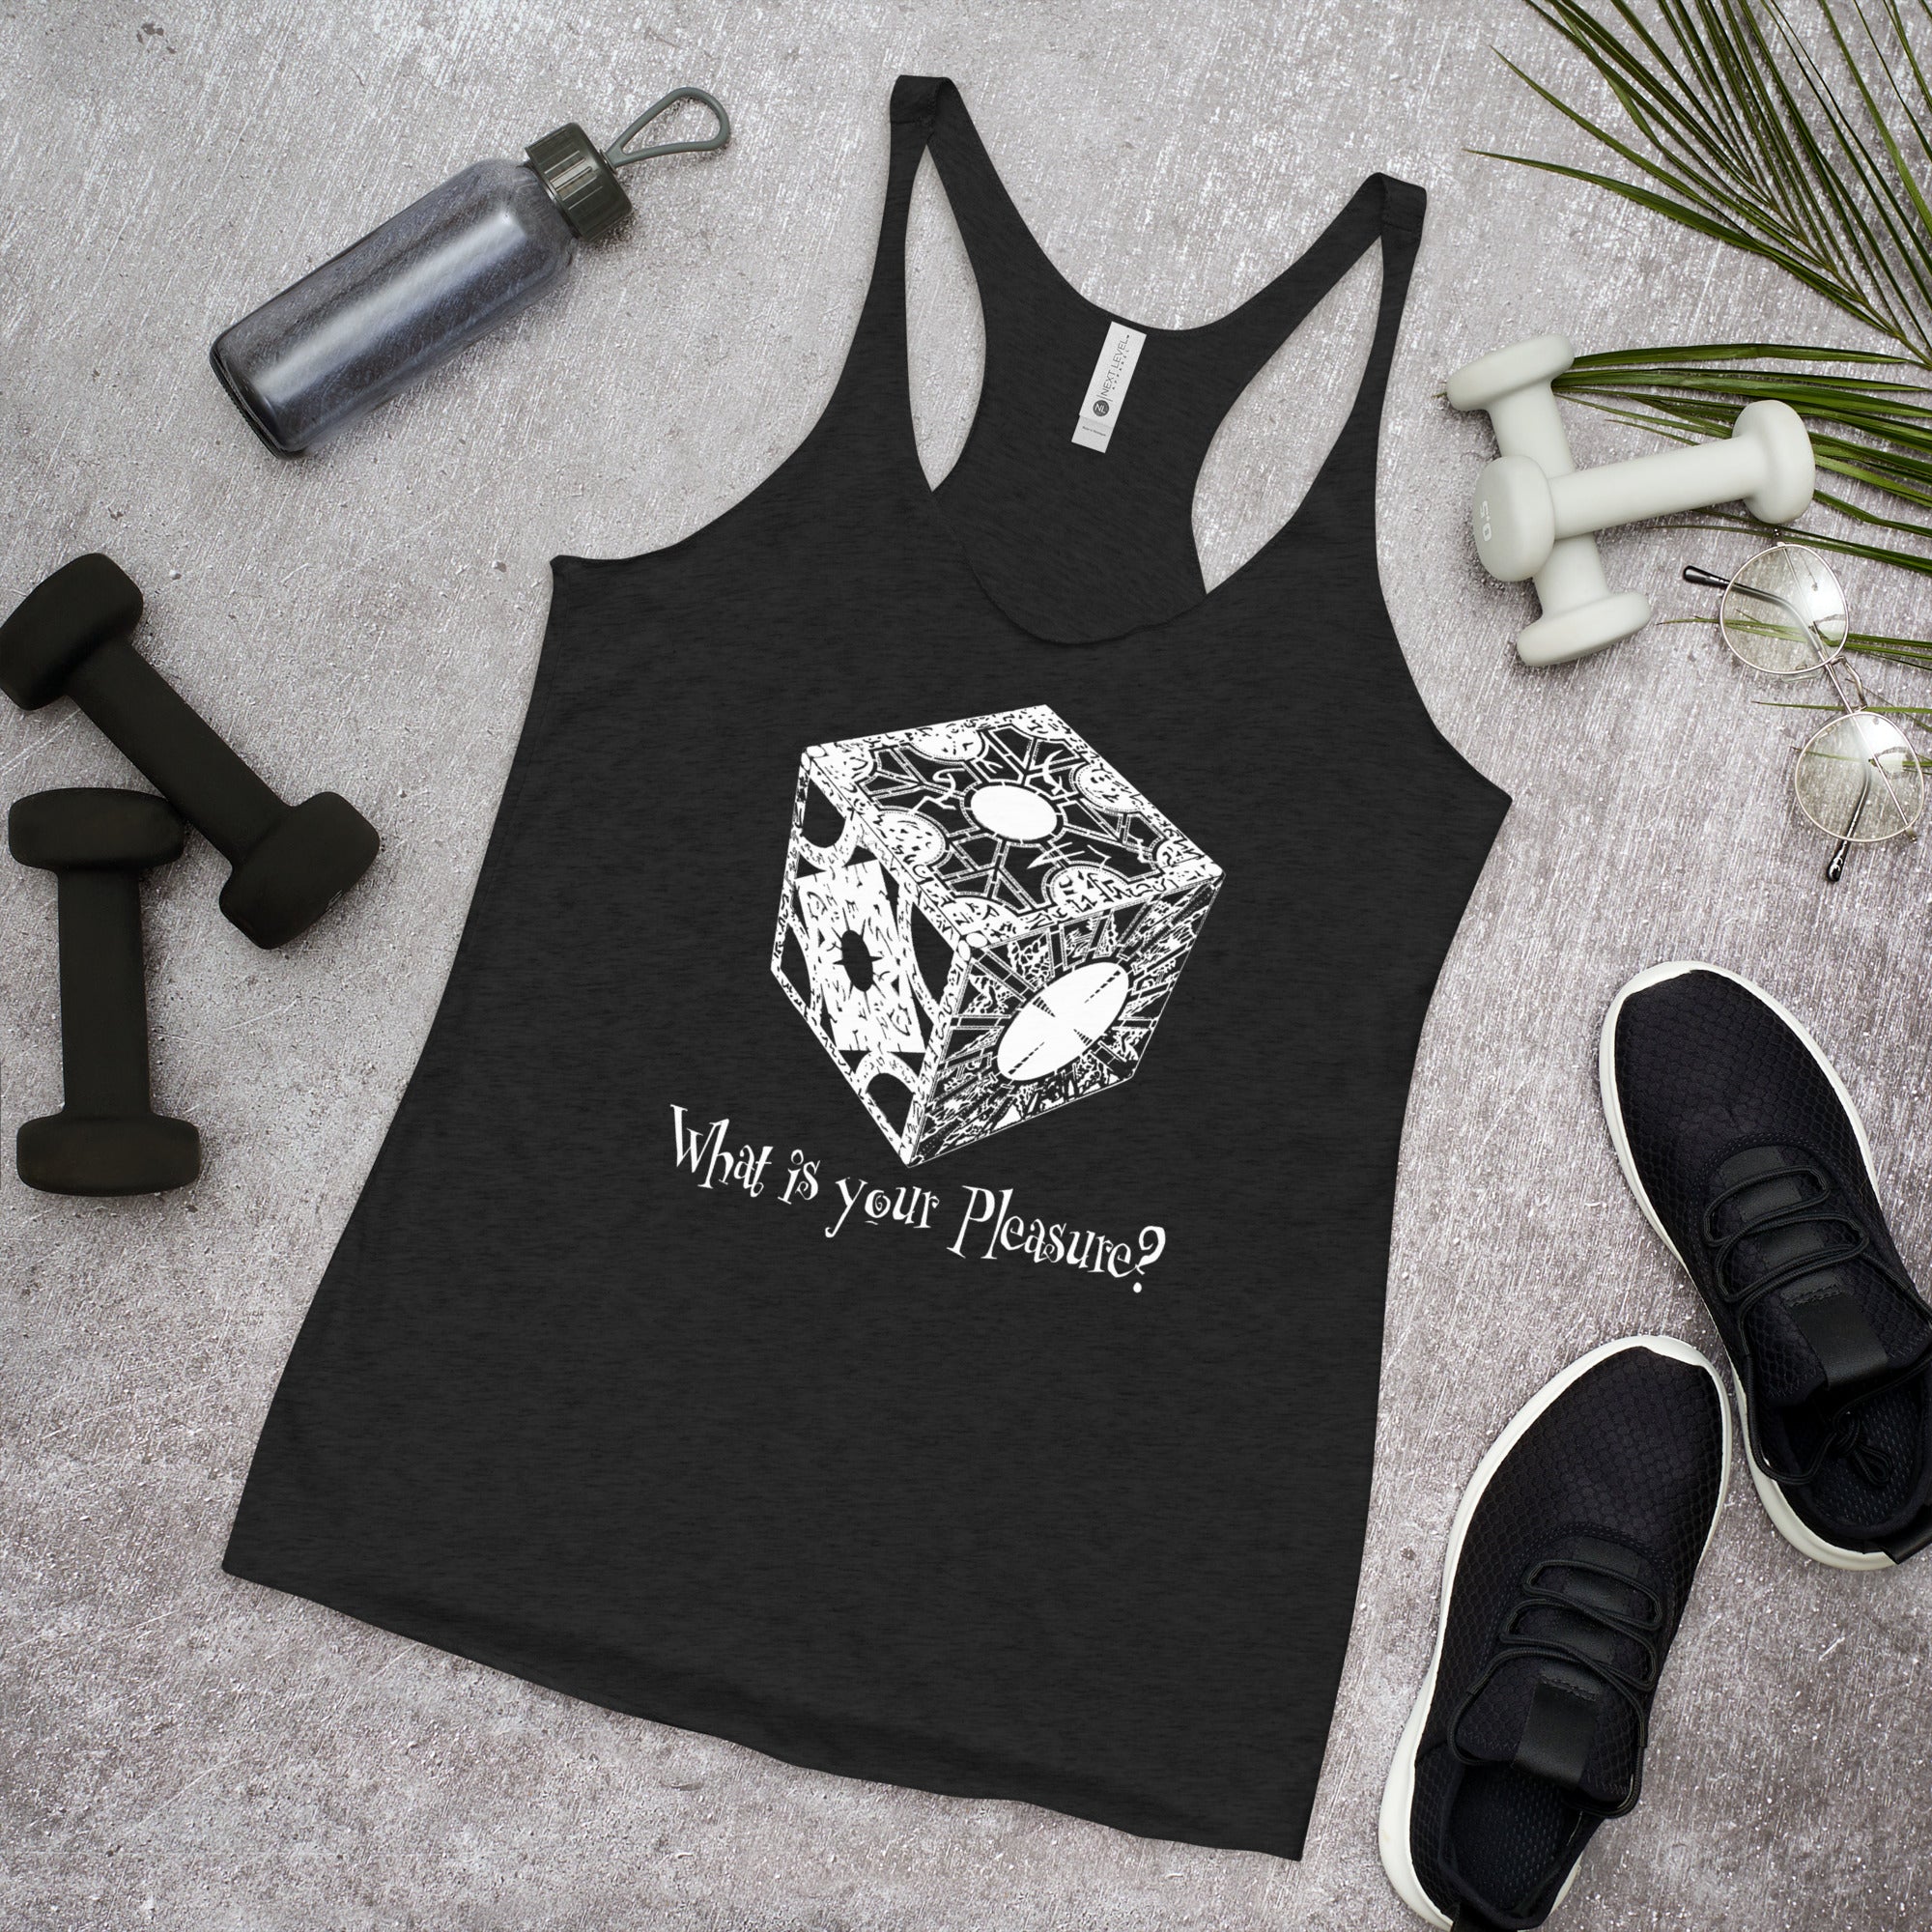 Puzzle Box - What is your Pleasure? Women's Racerback Tank Top Shirt - Edge of Life Designs